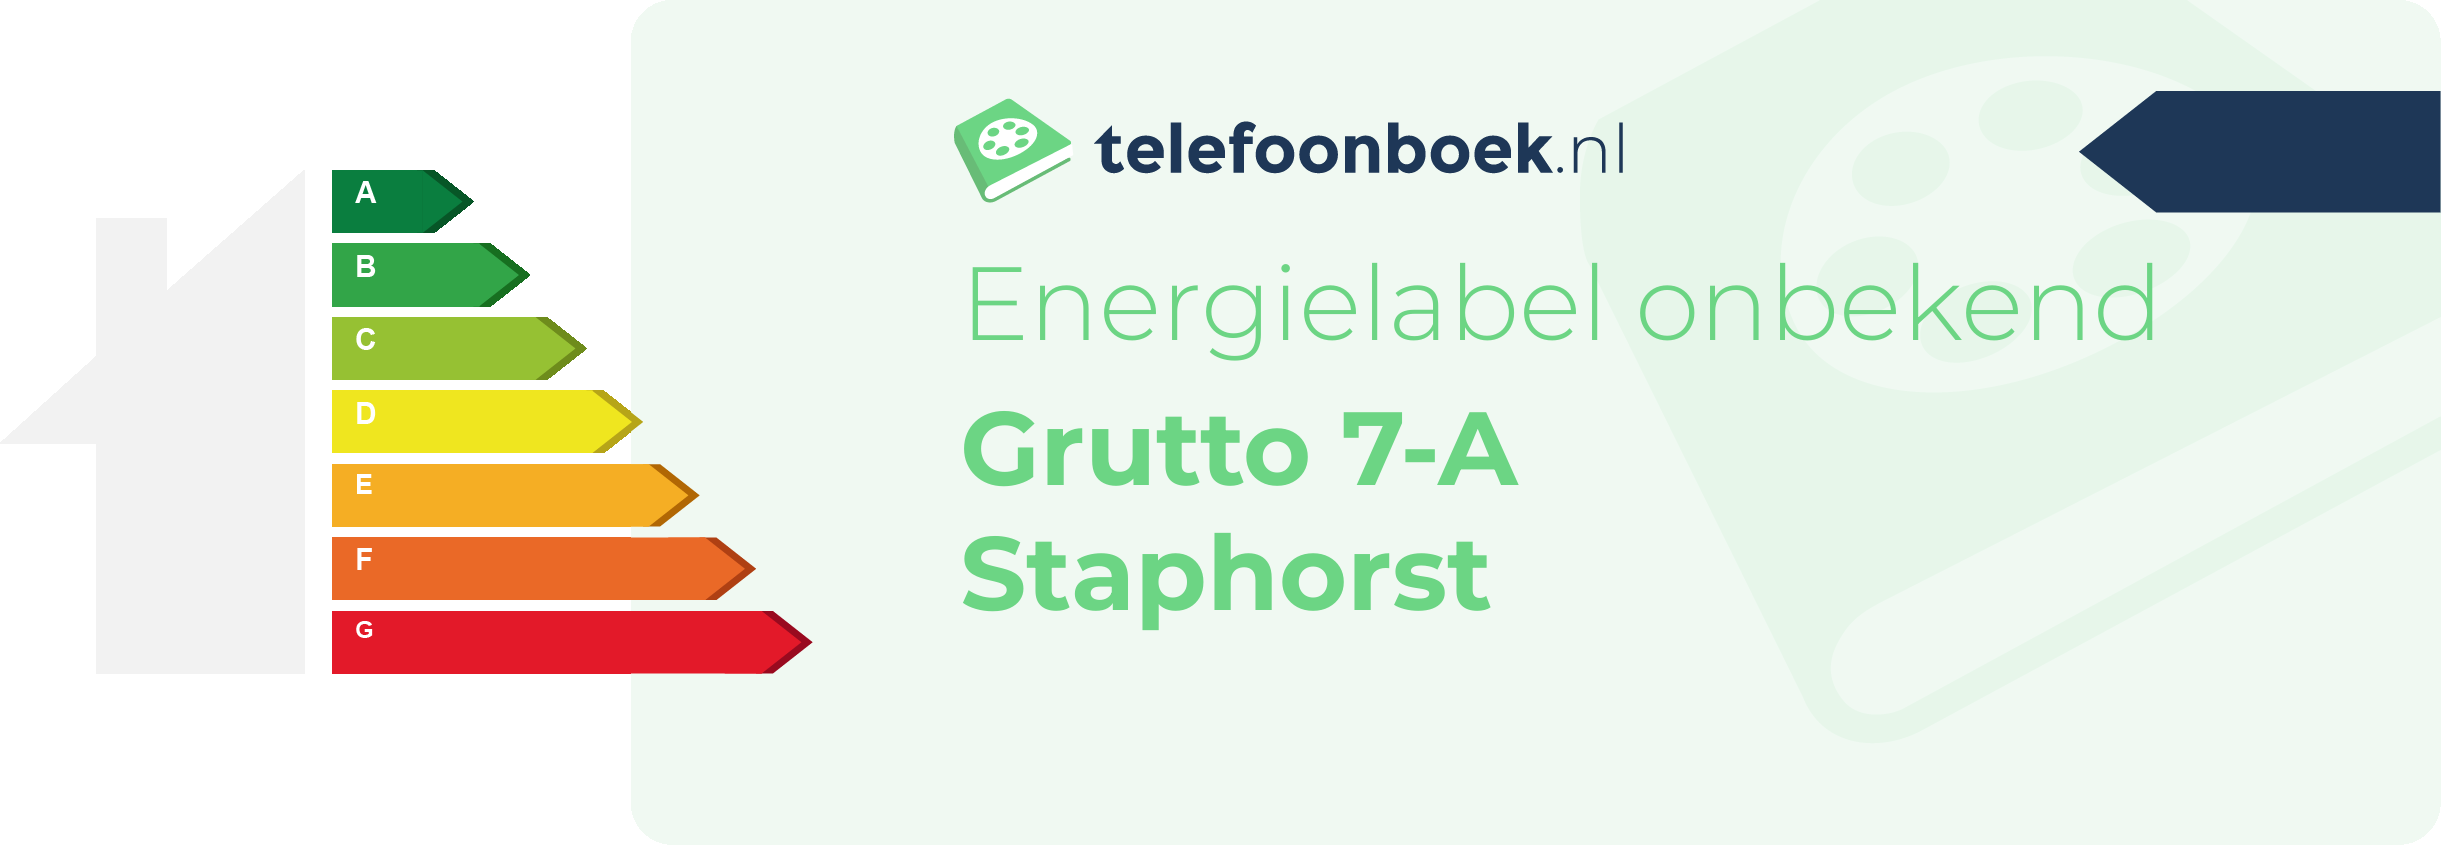 Energielabel Grutto 7-A Staphorst